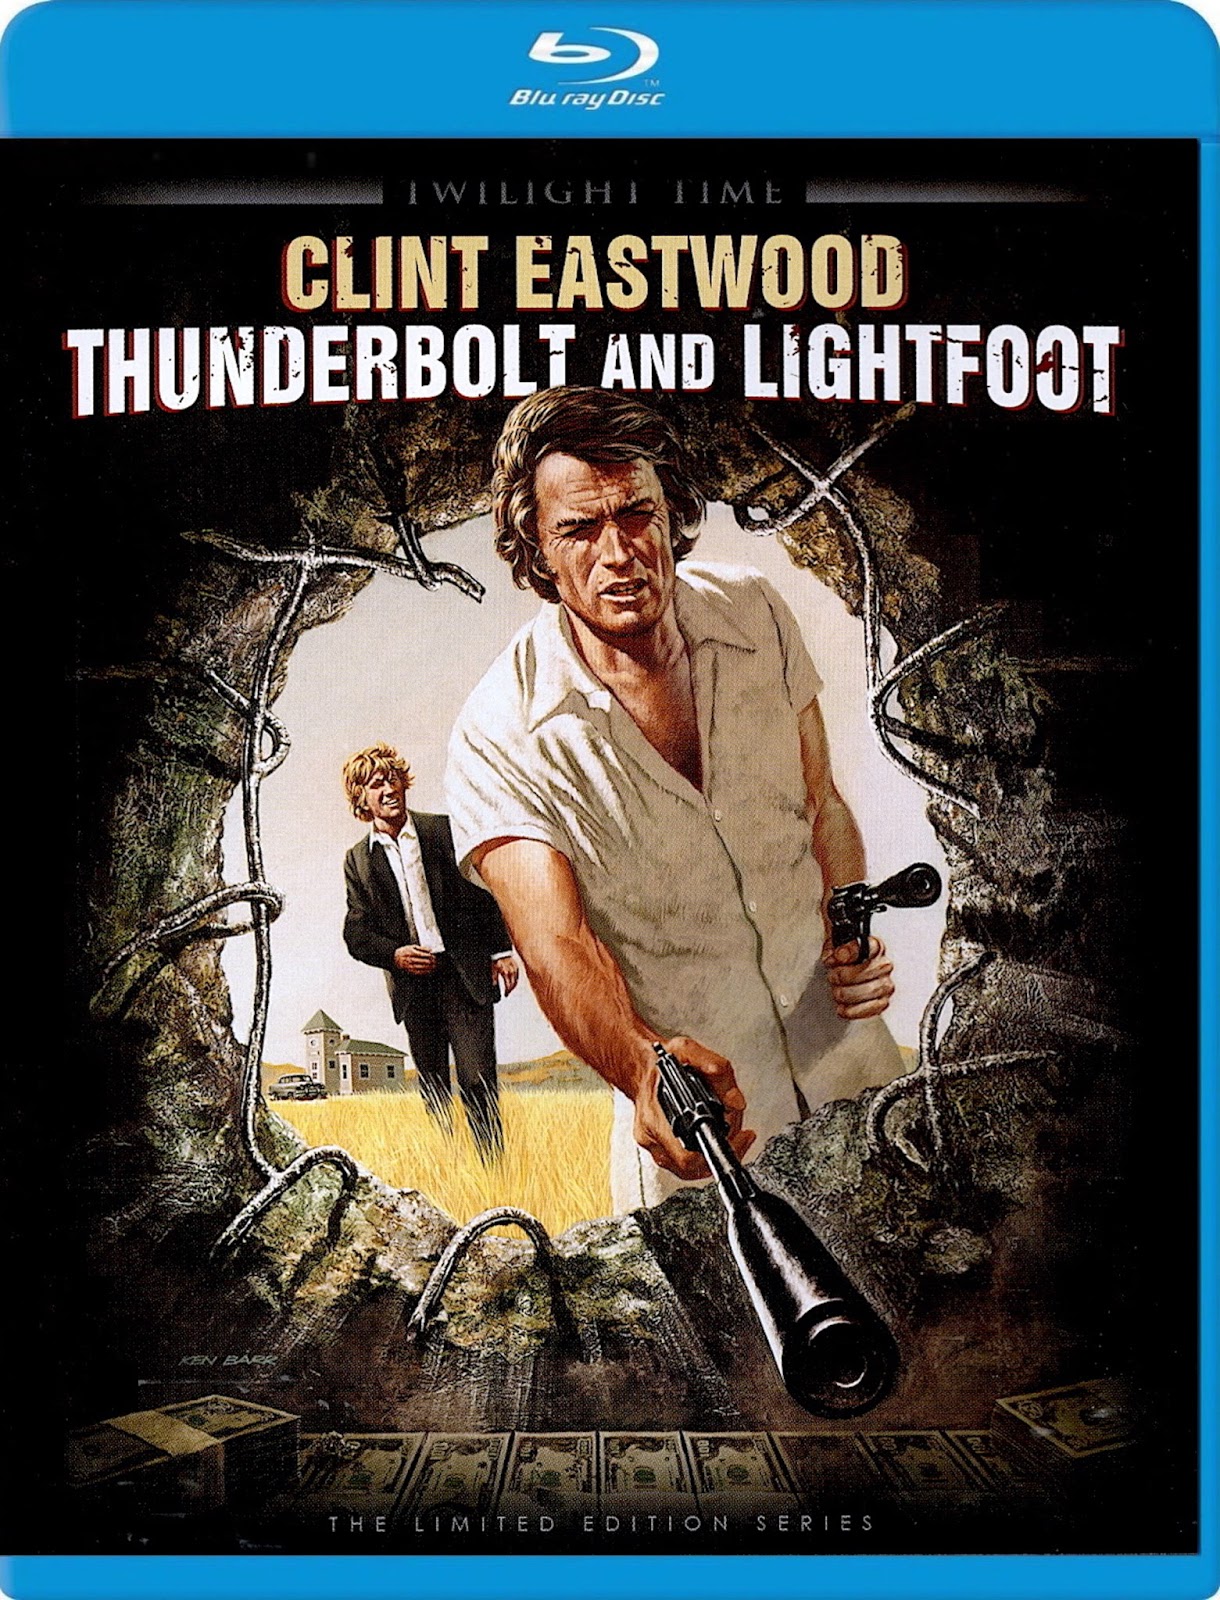 Blu Ray And Dvd Covers Thunderbolt And Lightfoot Twilight